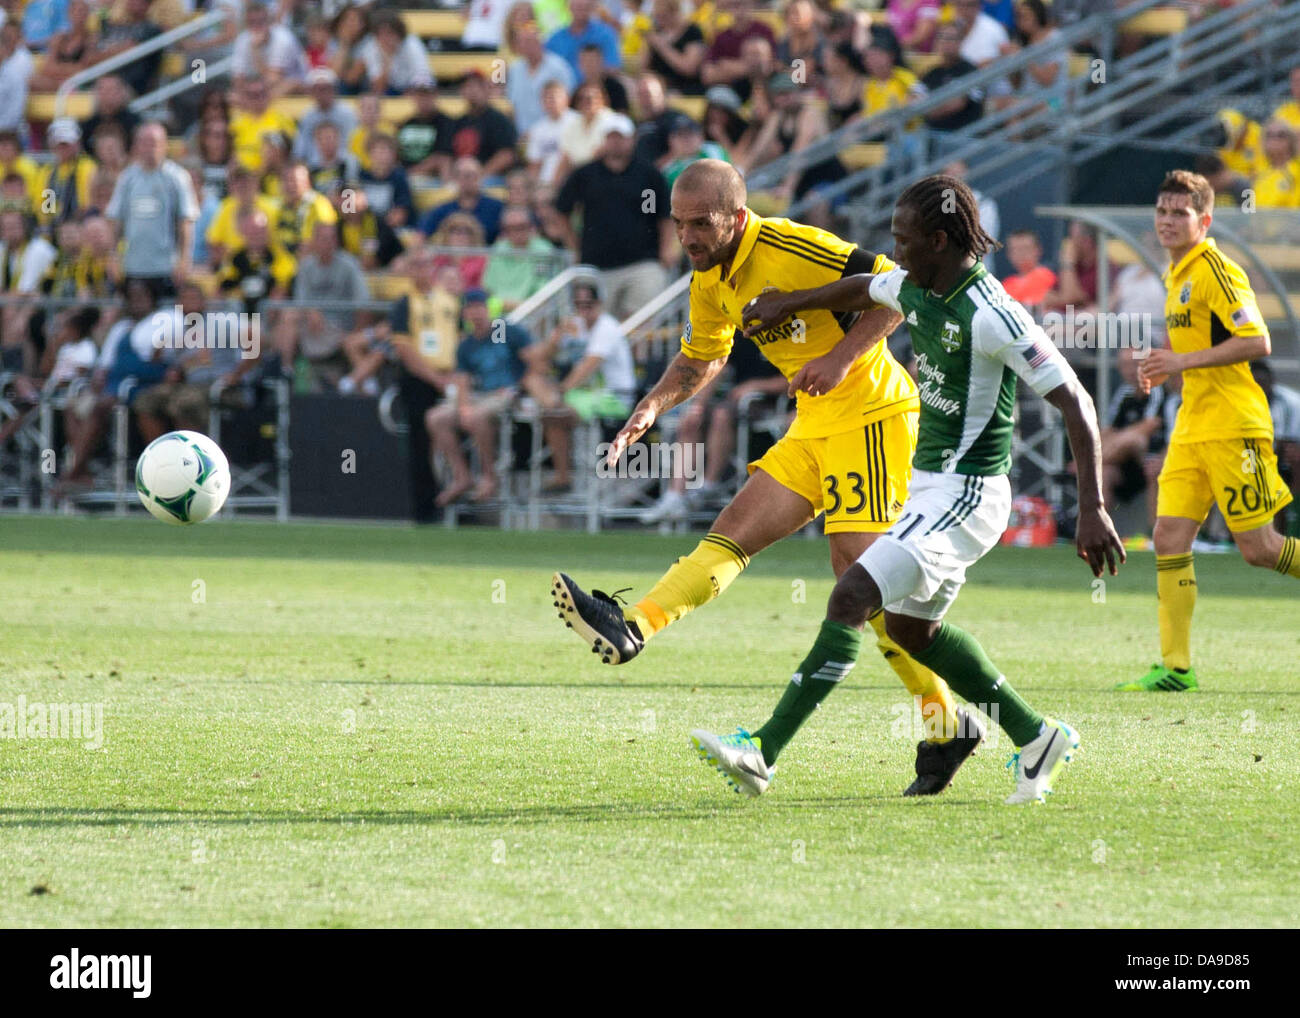 Columbus, OH, USA. 7th July, 2013. July 07, 2013: Columbus Crew Federico Higuain (33) makes a pass by defending Portland Timbers Diego Chara (21) during the Major League Soccer match between the Portland Timbers and the Columbus Crew at Columbus Crew Stadium in Columbus, OH. The Columbus Crew defeated the Portland Timbers 1-0. Credit:  csm/Alamy Live News Stock Photo